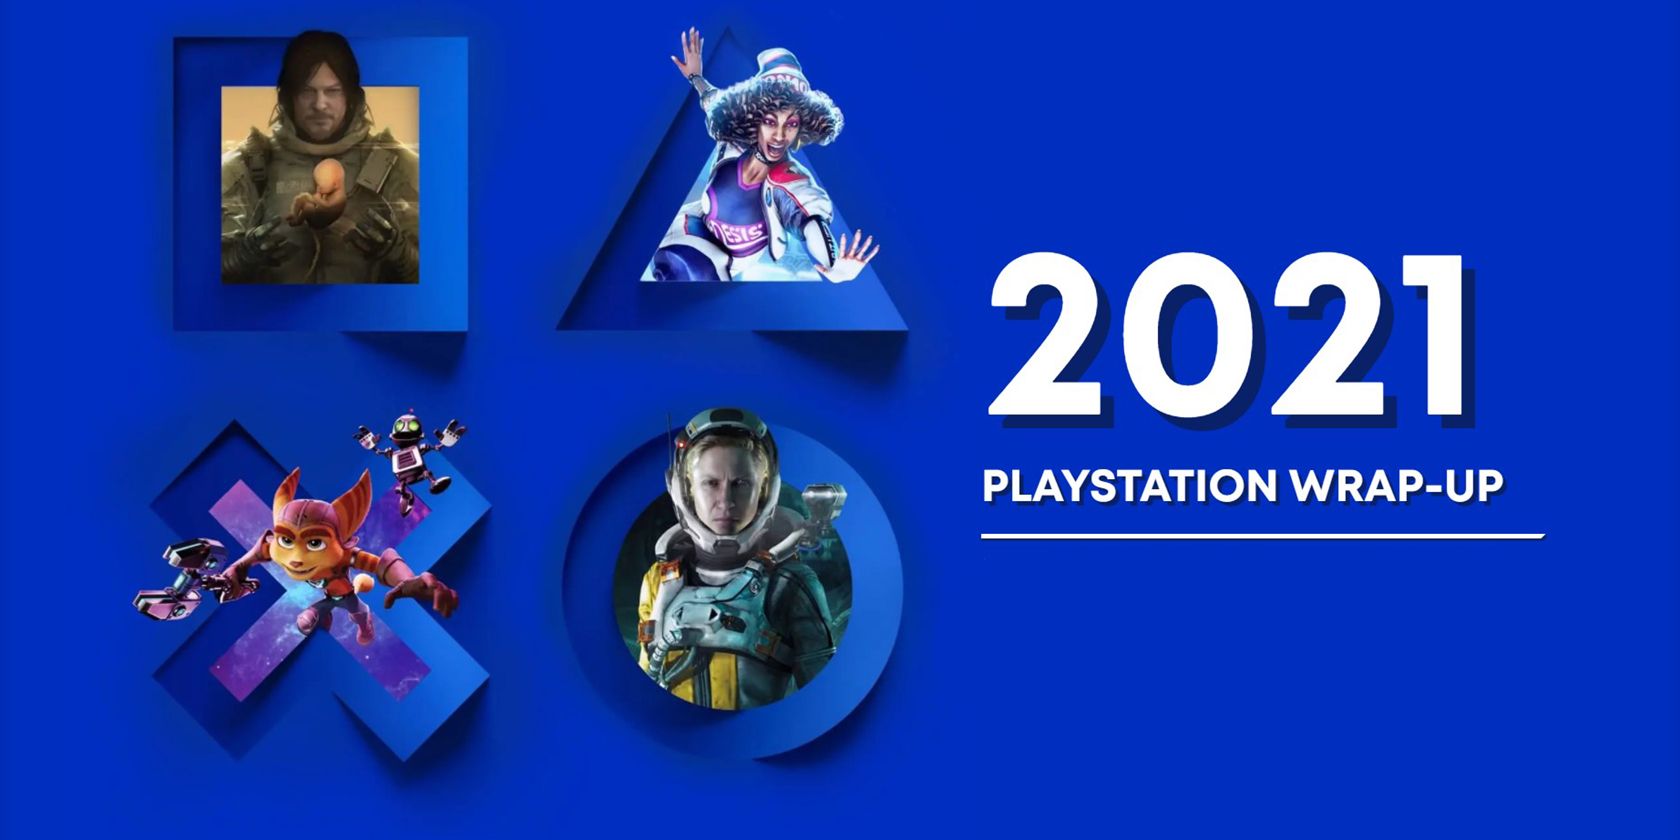 How to Get and Share Your 2021 PlayStation Wrap-Up Report